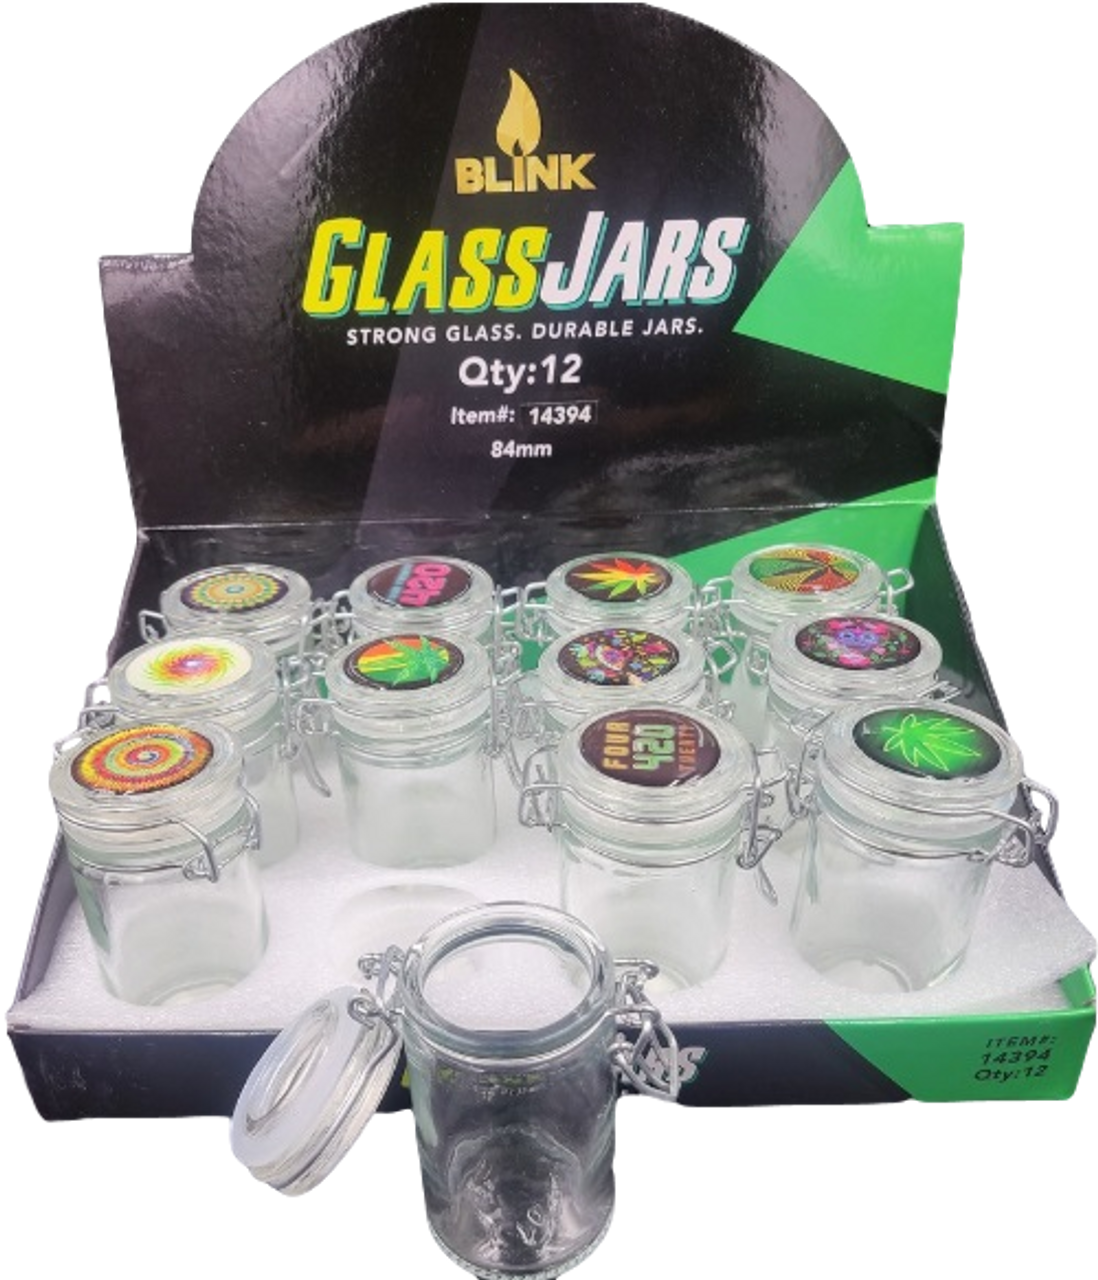 Blink Air Tight Glass Jars with Latch Top holds 3.5 grams 12 pack Retail Display